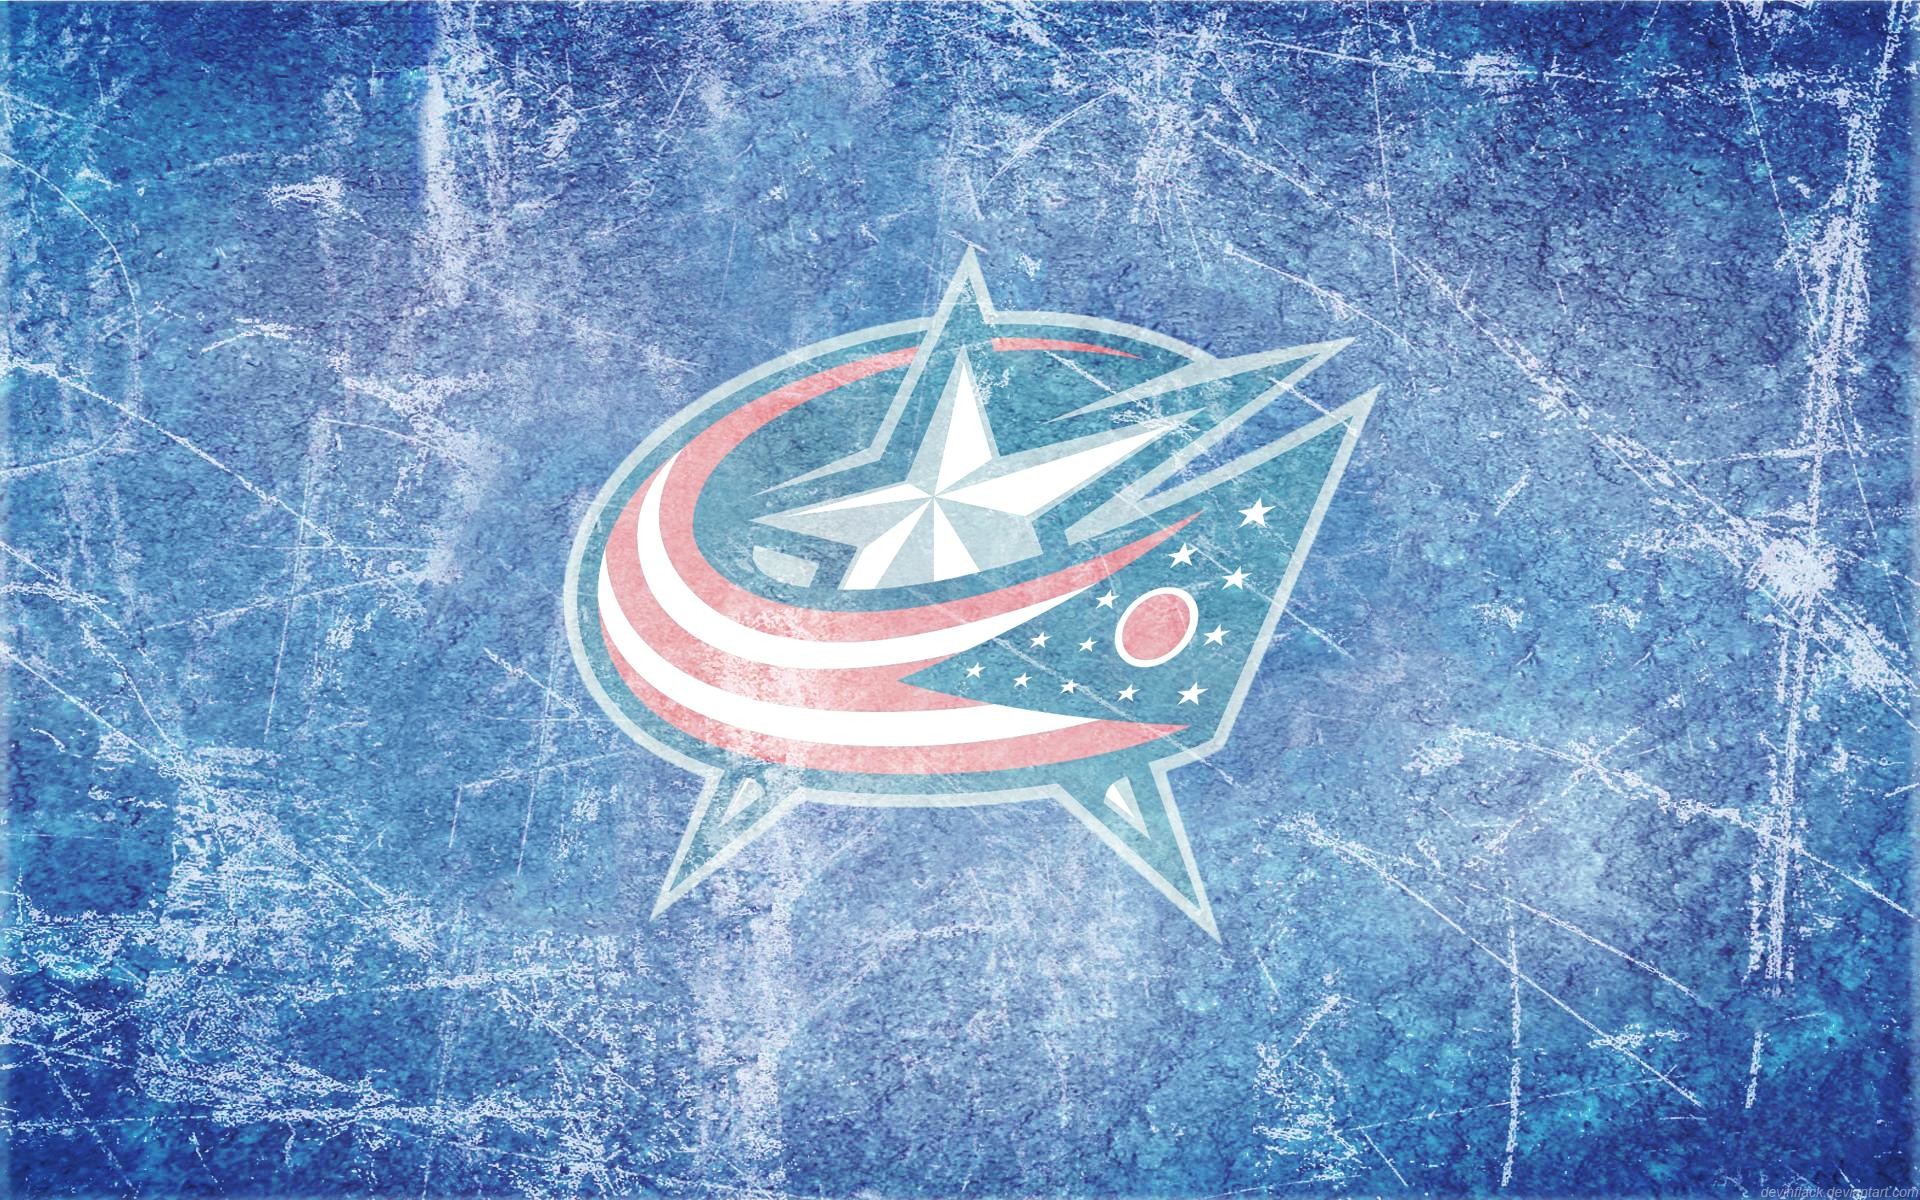 Columbus Blue Jackets Iphone Wallpapers